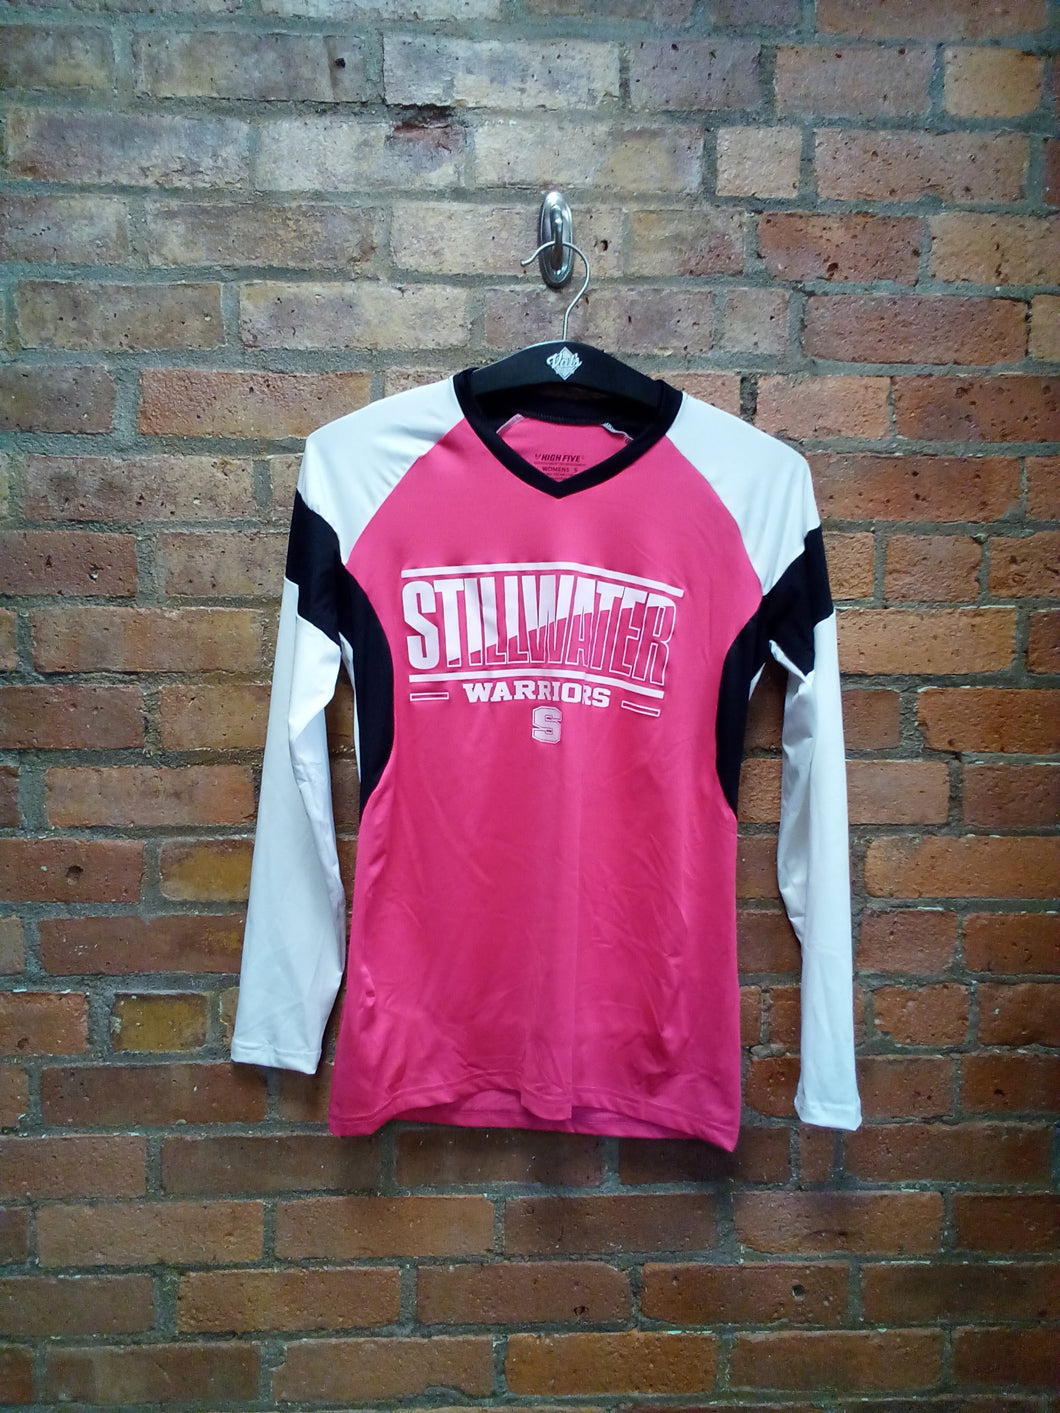 CLEARANCE - Stillwater Warriors Pink/White/Black Women's Performance Long Sleeved Shirt - Size Small